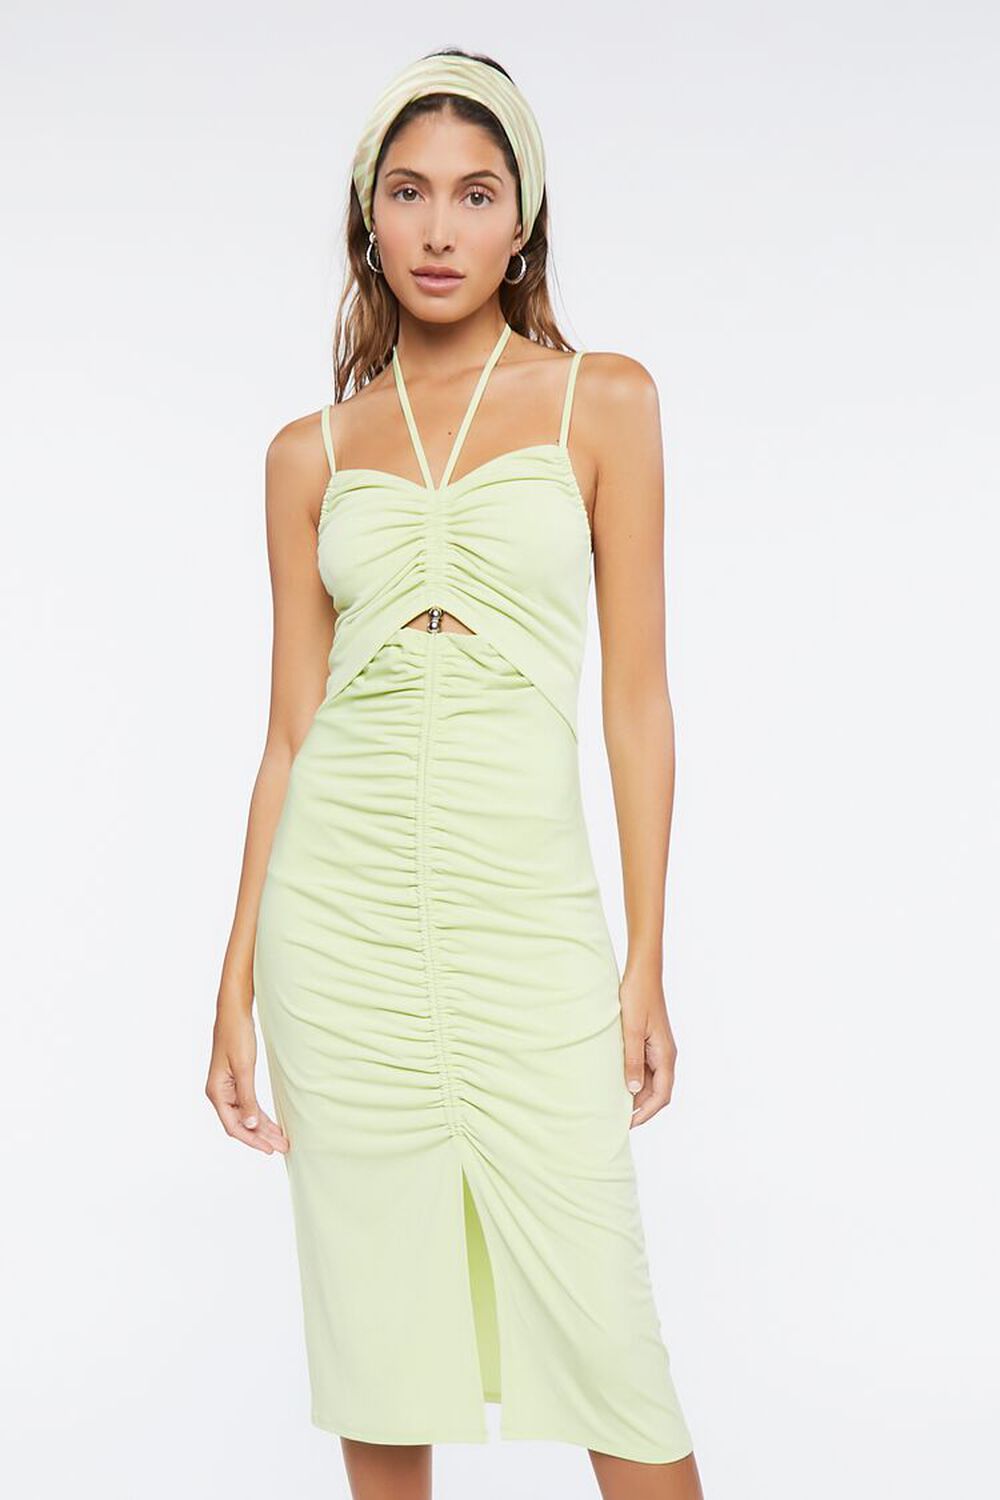 WILD LIME Ruched Cutout Halter Midi Dress, image 1